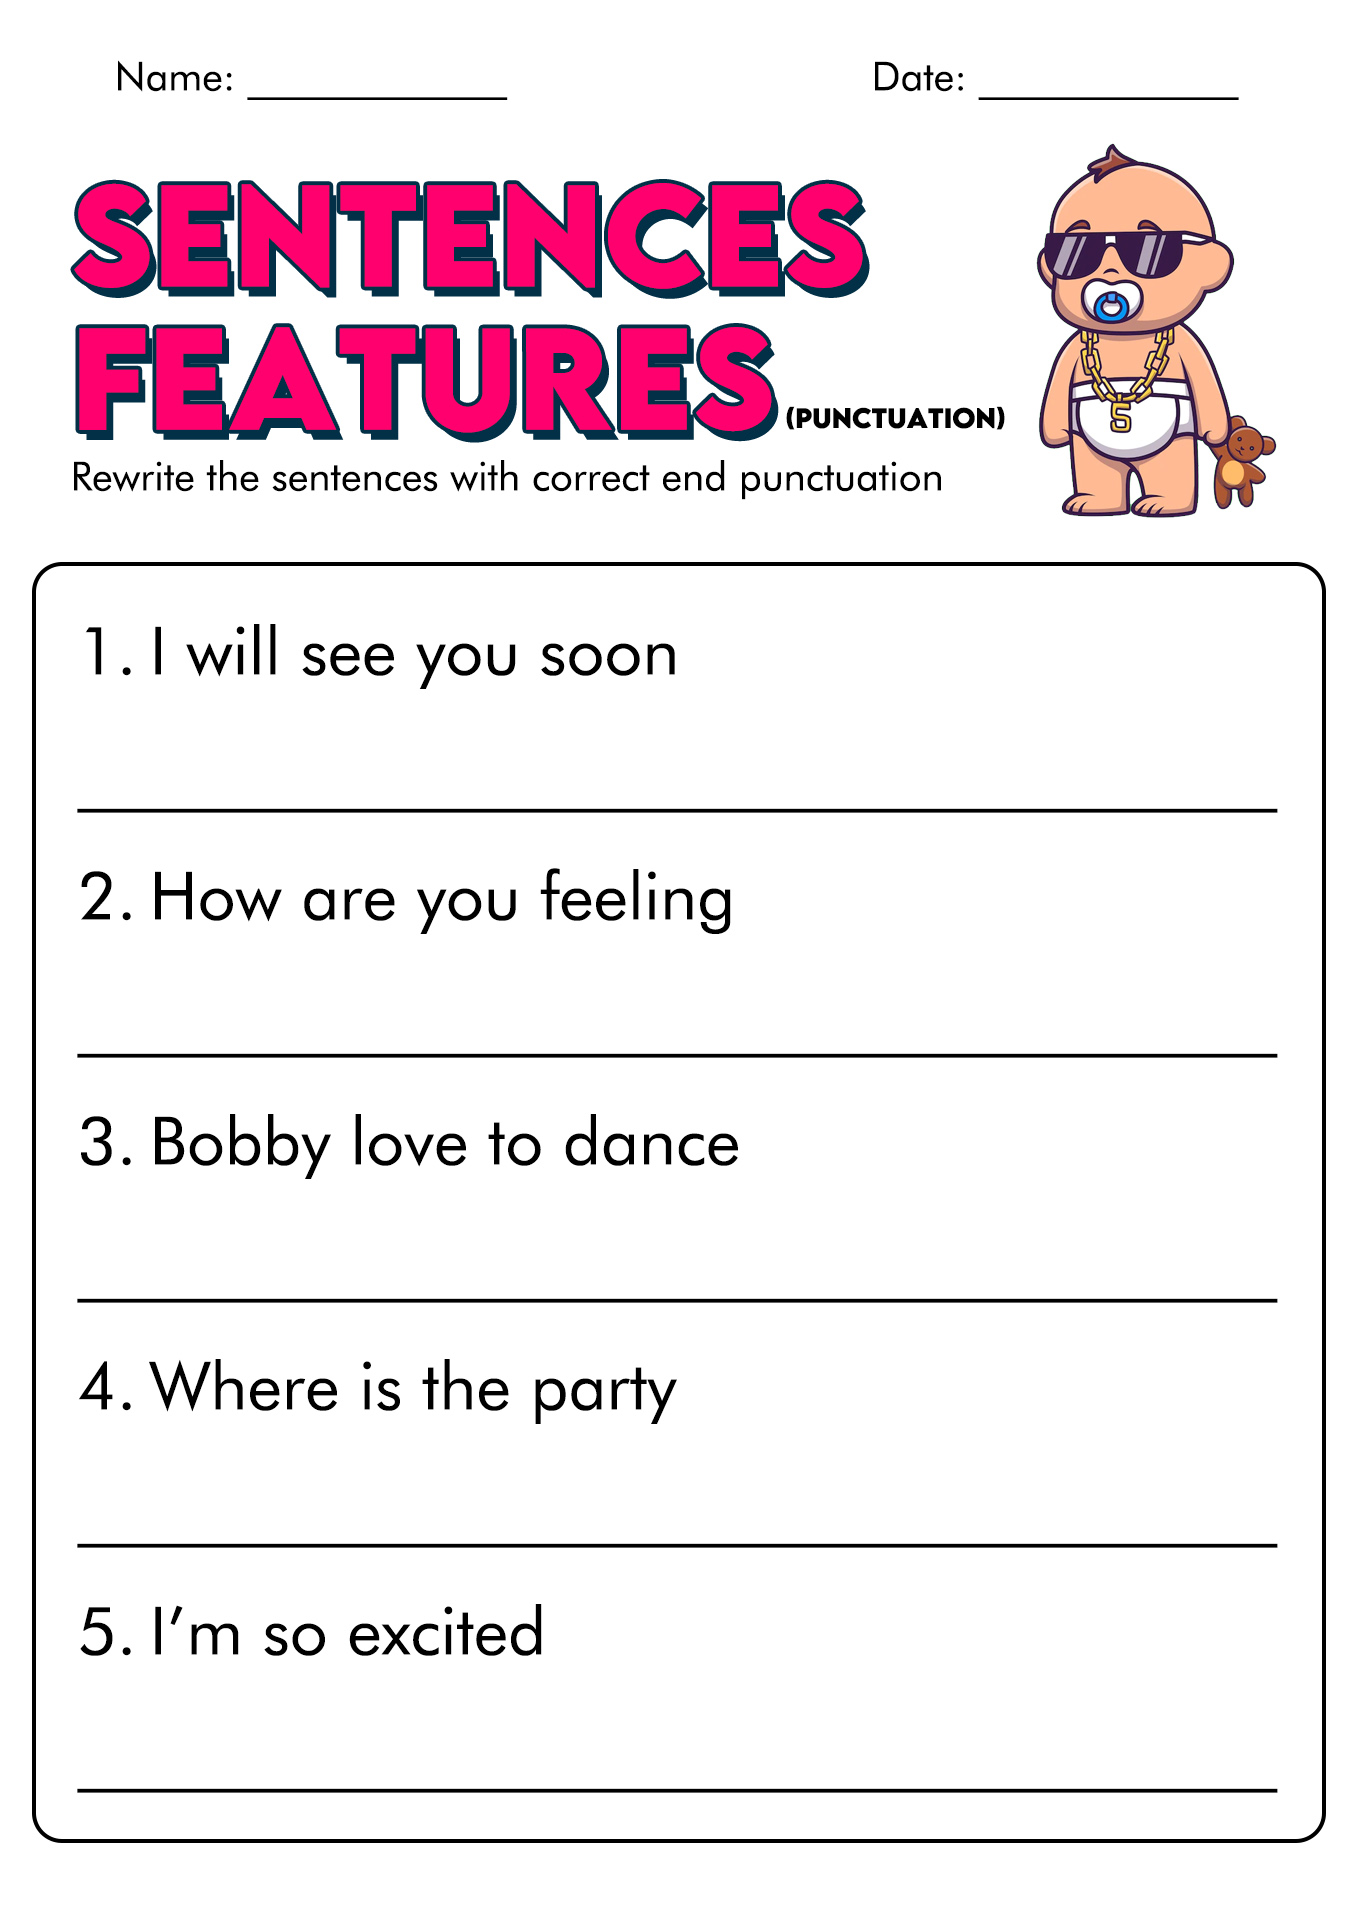 20 Best Images Of Punctuation Worksheets For Grade 5 5th Grade B23